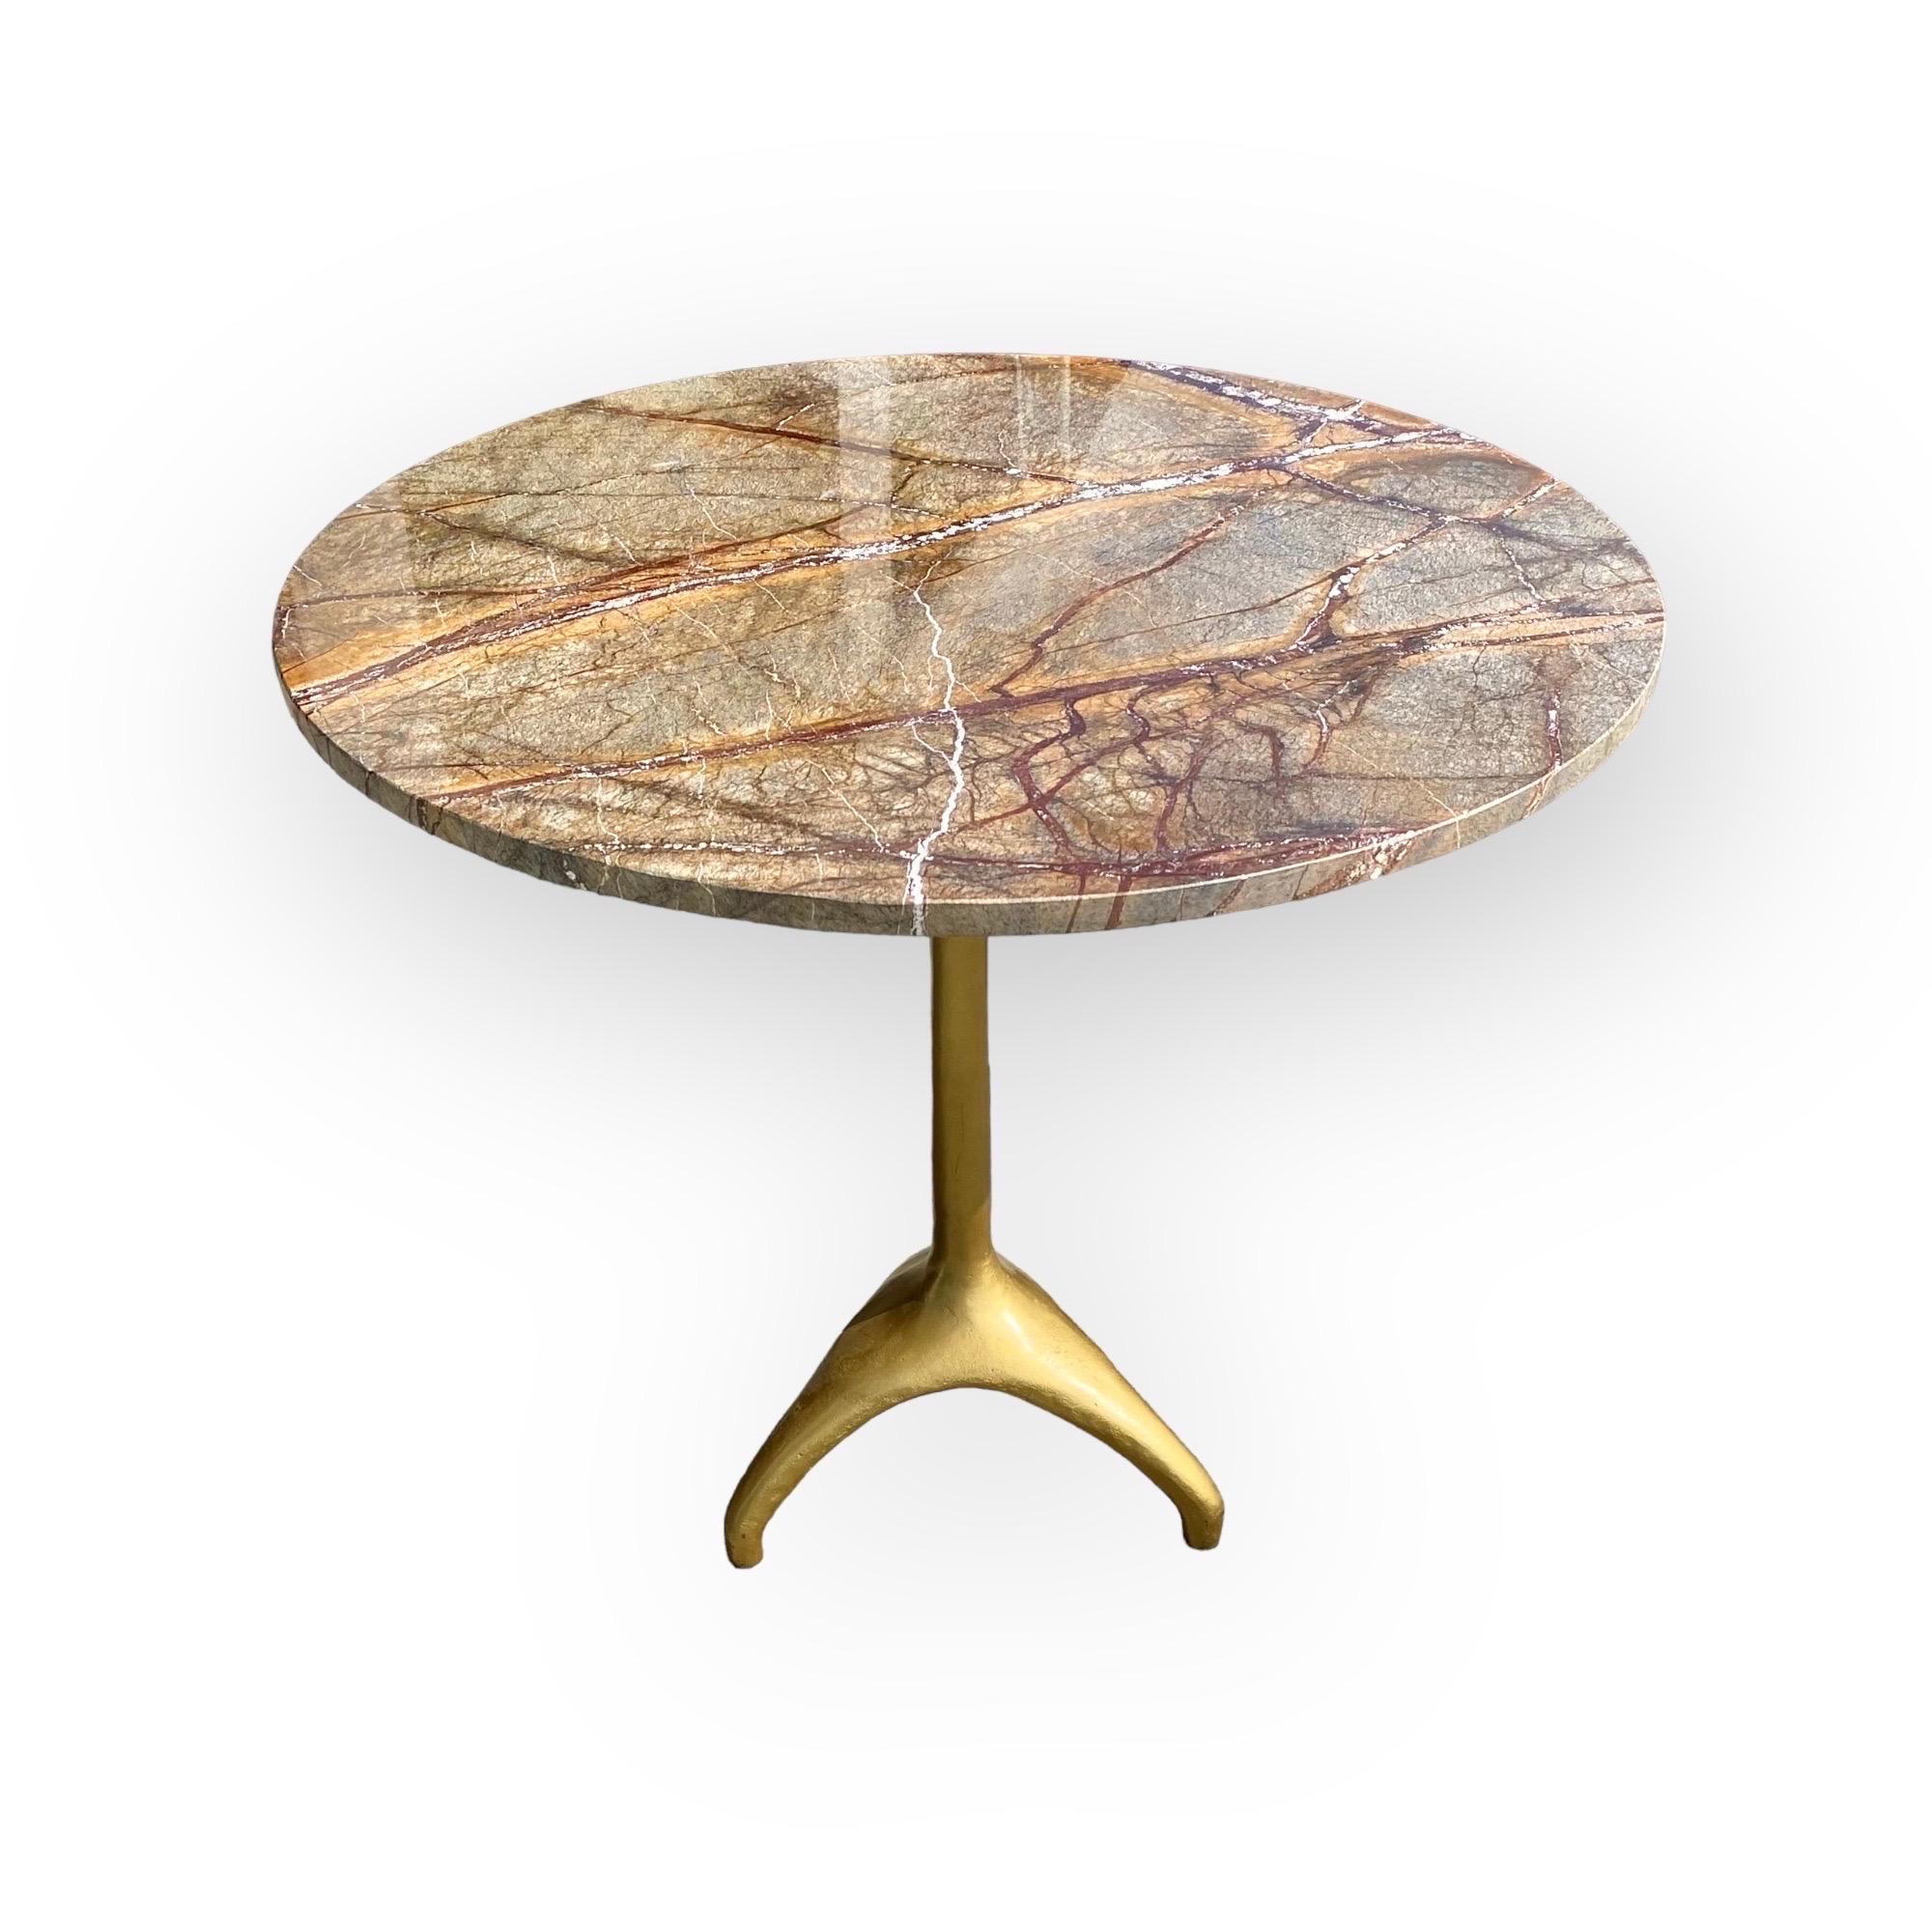 This Café Table's warm, polished Bidasar marble, has a gilt brass on cast-iron pedestal base. This round Café Table provides an inviting table for two when placed in a breakfast nook, a beautiful addition in your master bathroom, a gaming table in